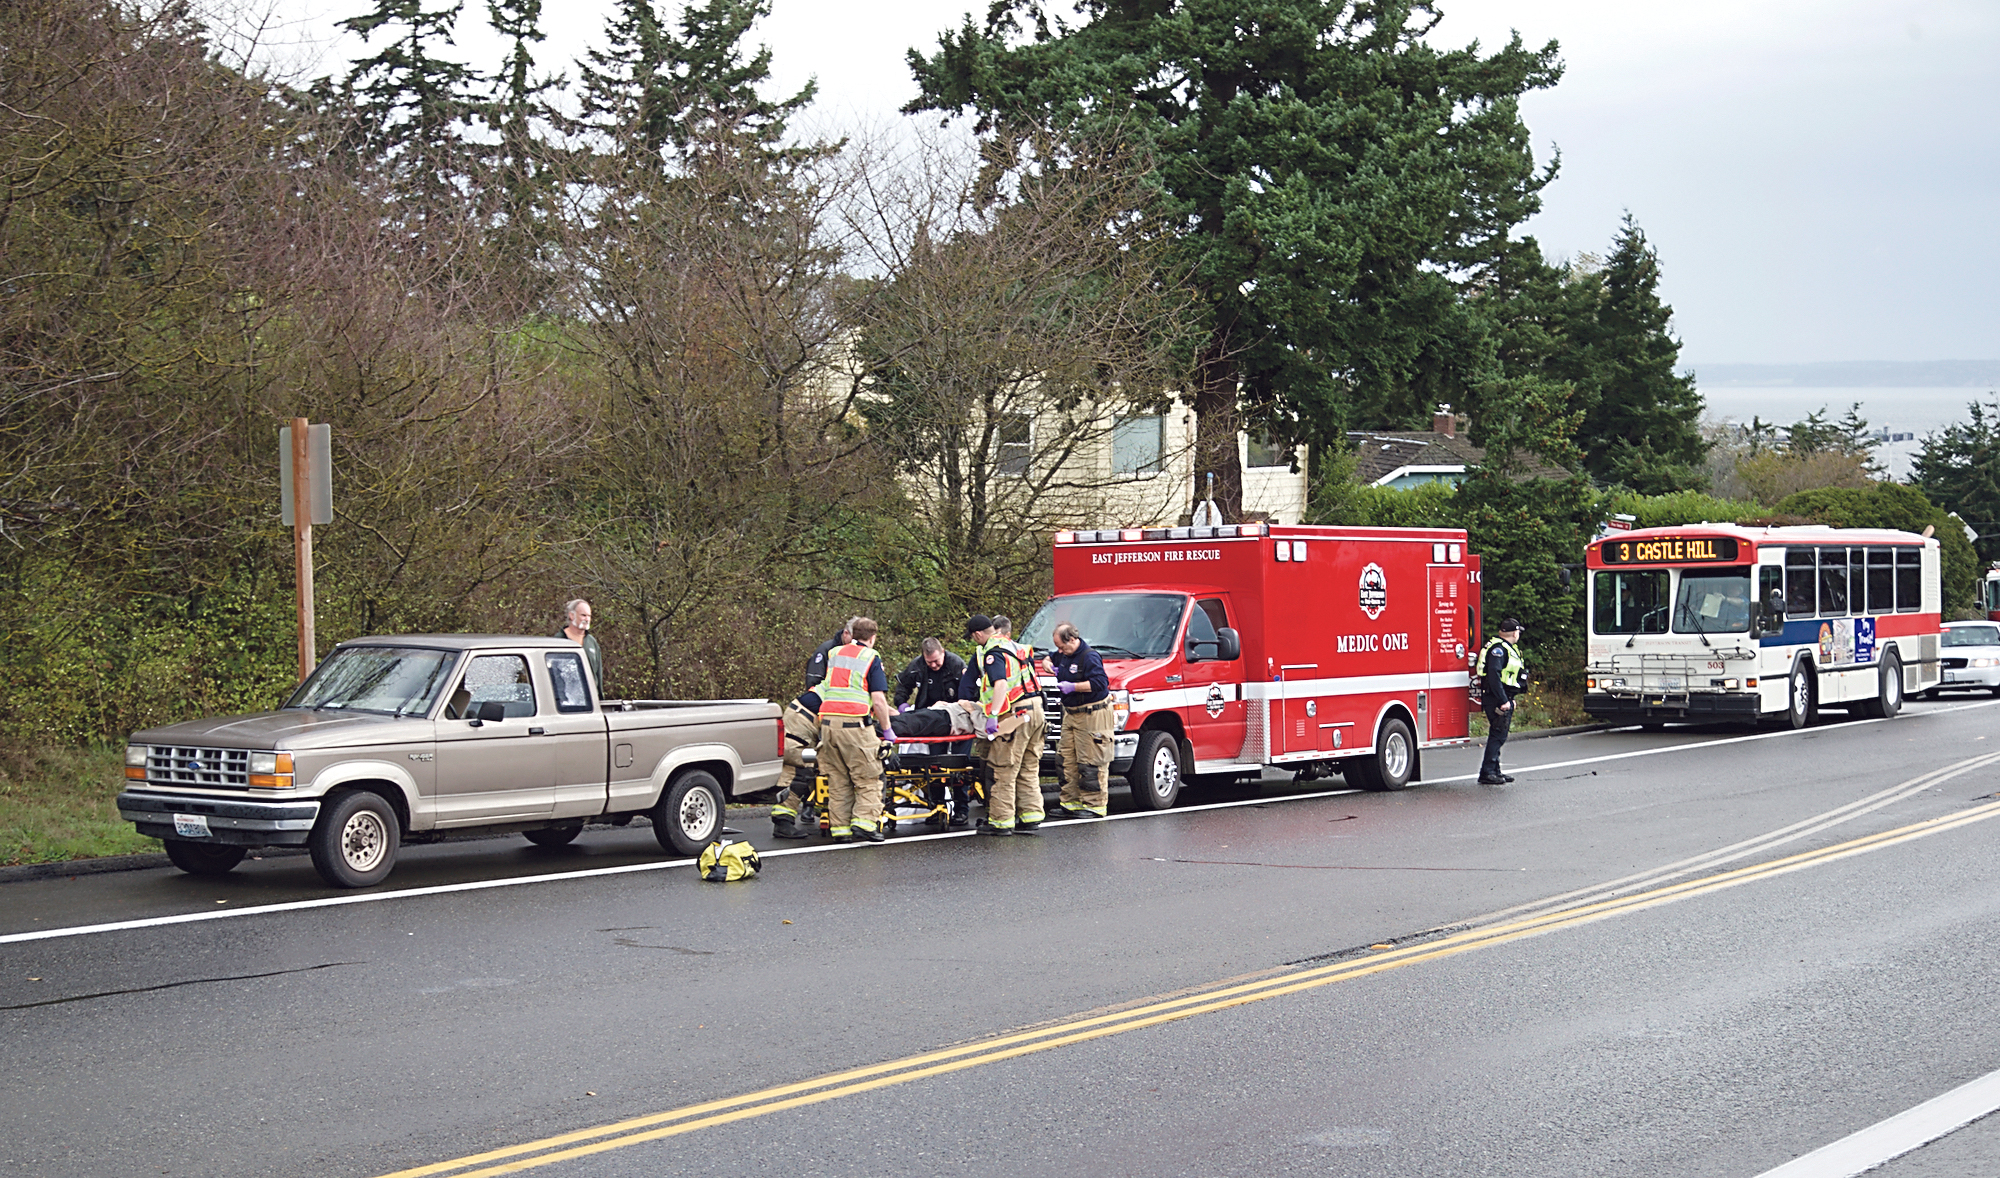 East Jefferson Fire Rescue and Port Townsend police load an injured man onto a gurney for transport to Jefferson Healthcare after a crash on Sims Way in Port Townsend on Saturday morning. Steve Mullensky/for Peninsula Daily News